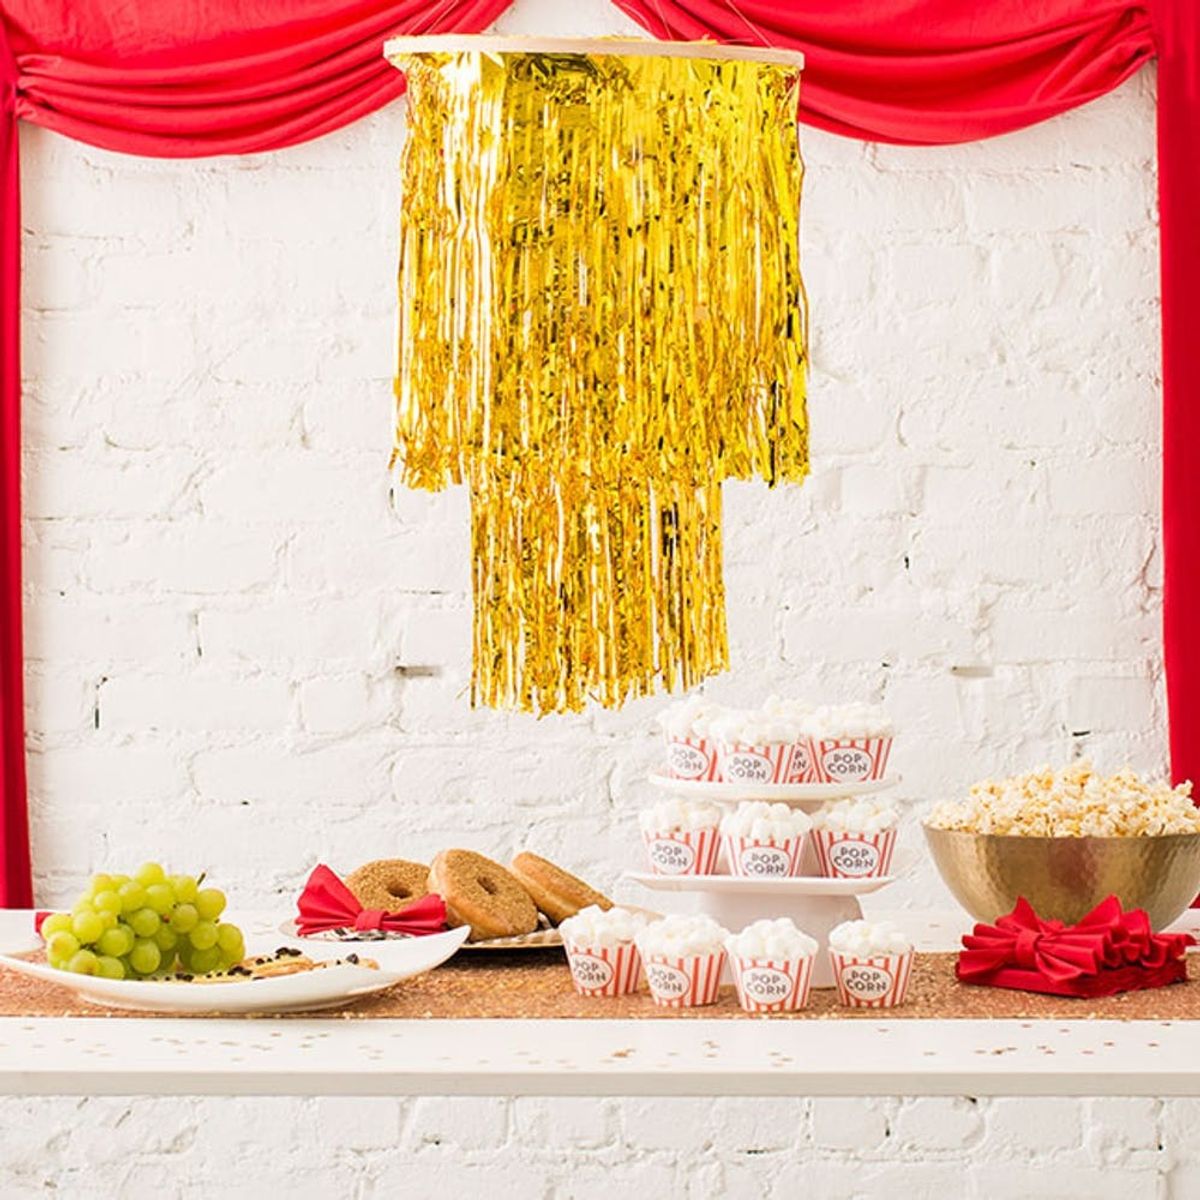 2 DIY Projects for the Best Oscars Party Ever